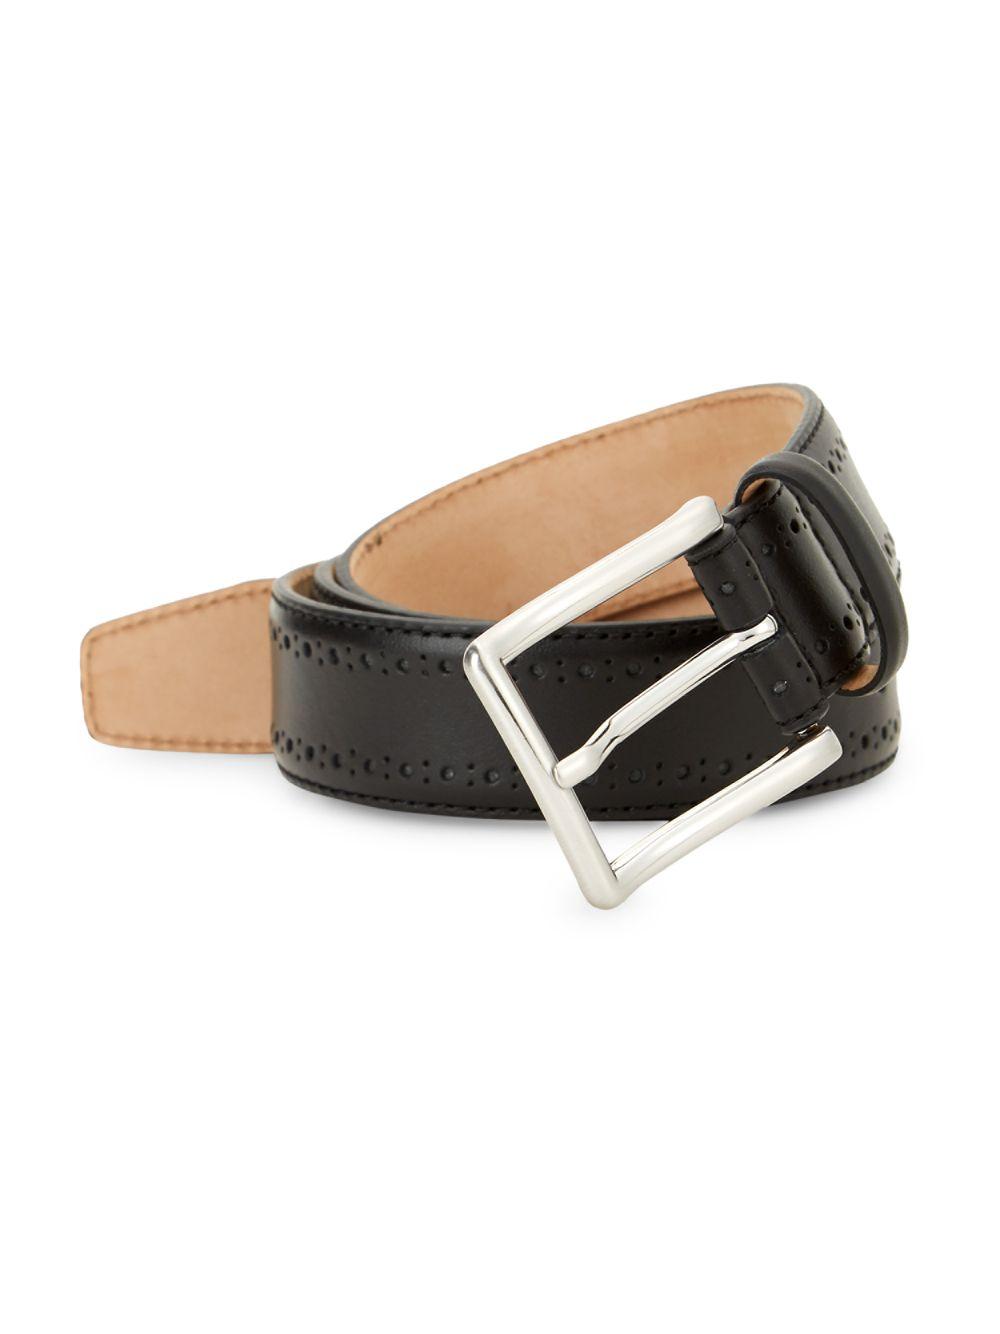 Saks Fifth Avenue Classic Leather Belt in Black for Men - Lyst